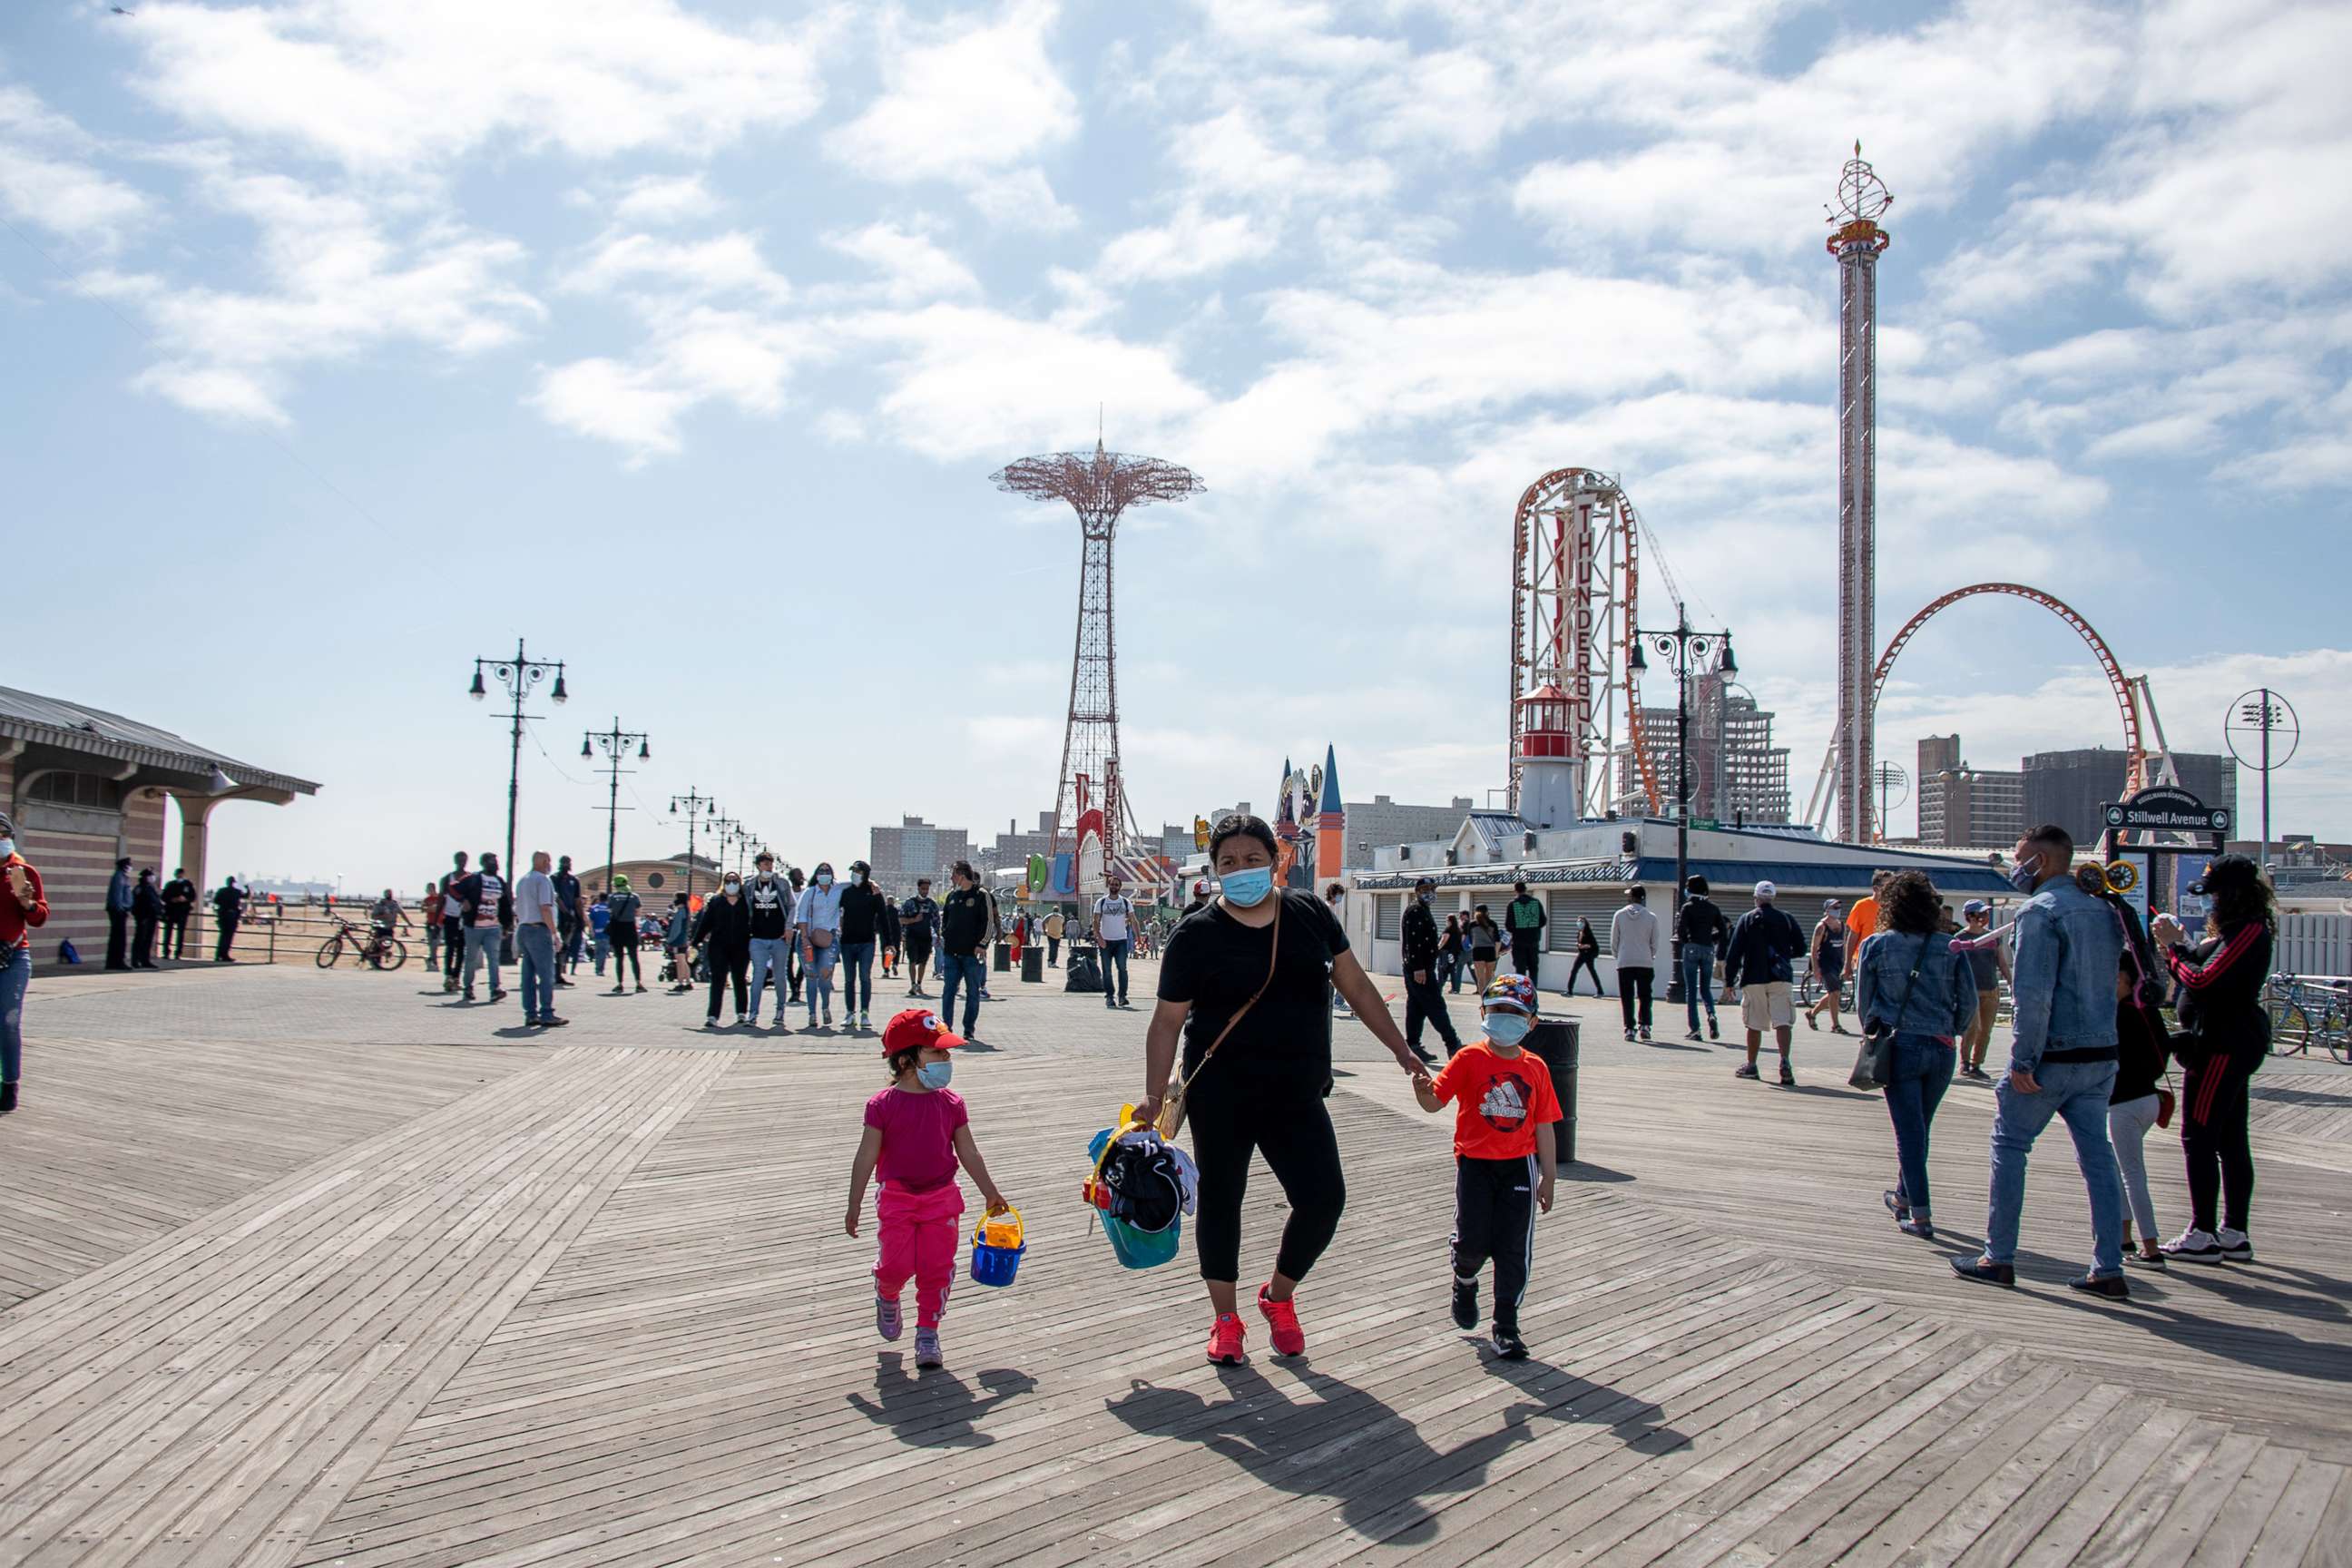 PHOTO: In this May 25, 2020, file photo, people wearing masks walk on the boardwalk at Coney Island with a view of Luna Park in the background in New York.